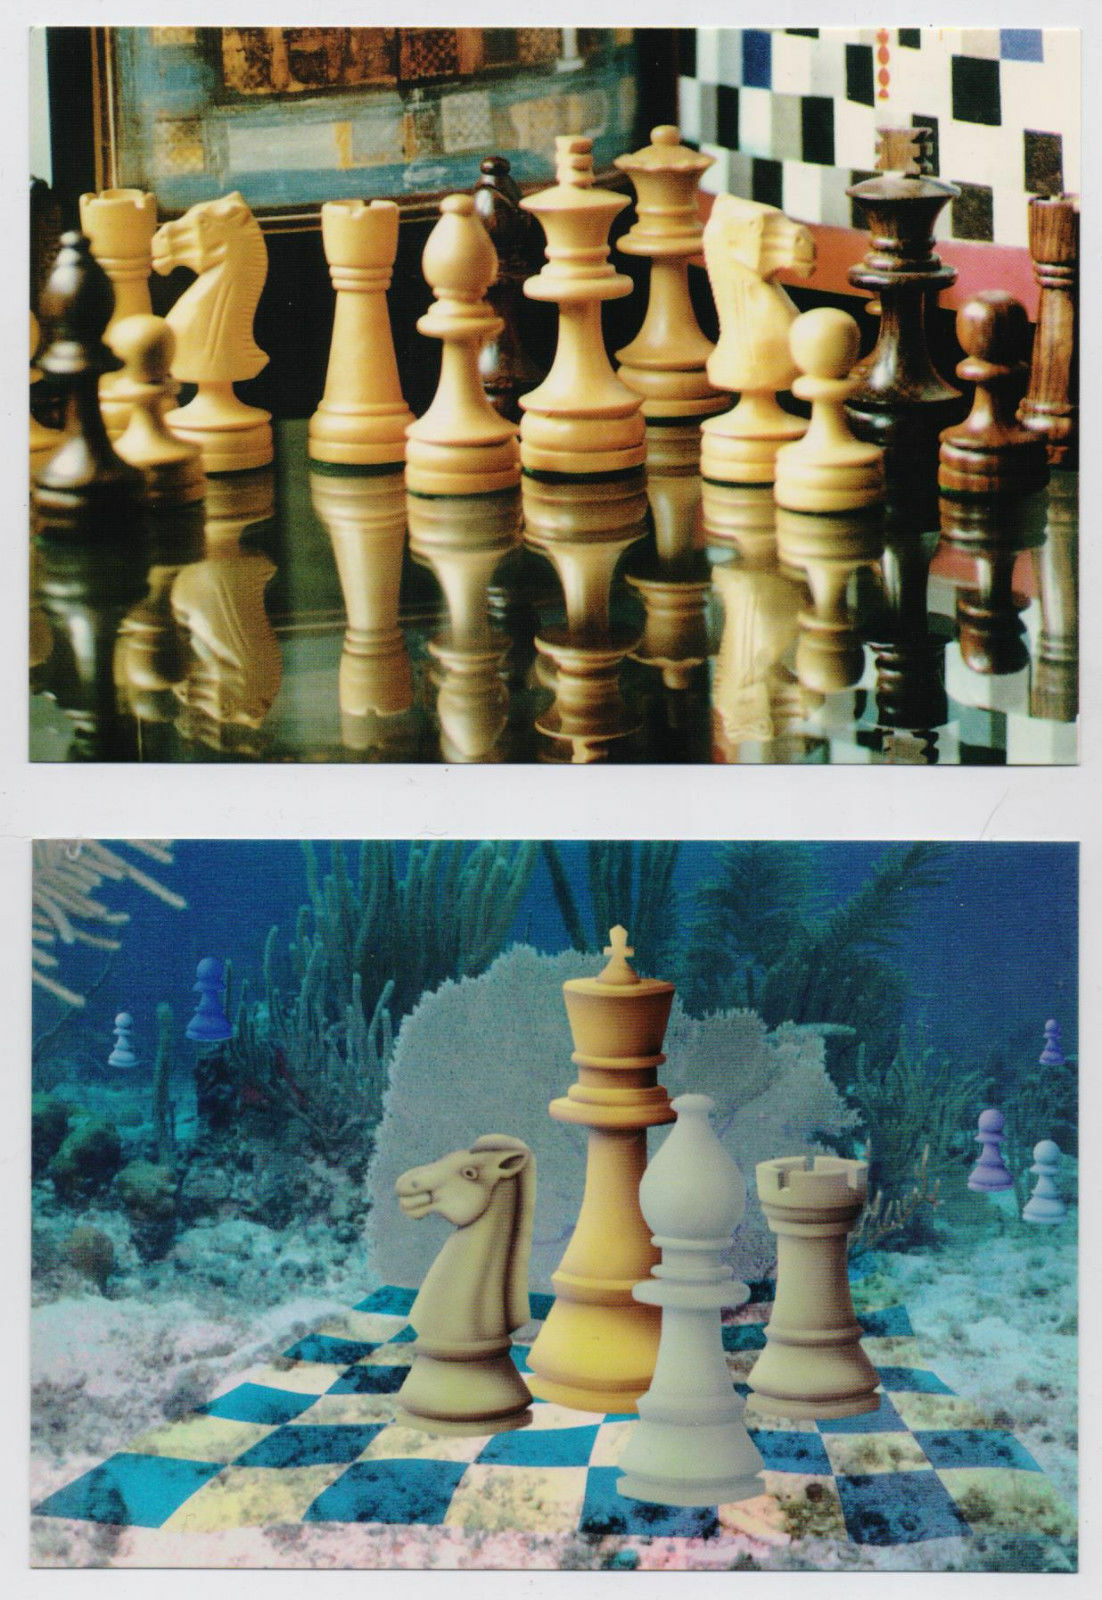 10743.5 Chess Postcards with the Chess Grand Masters Games: